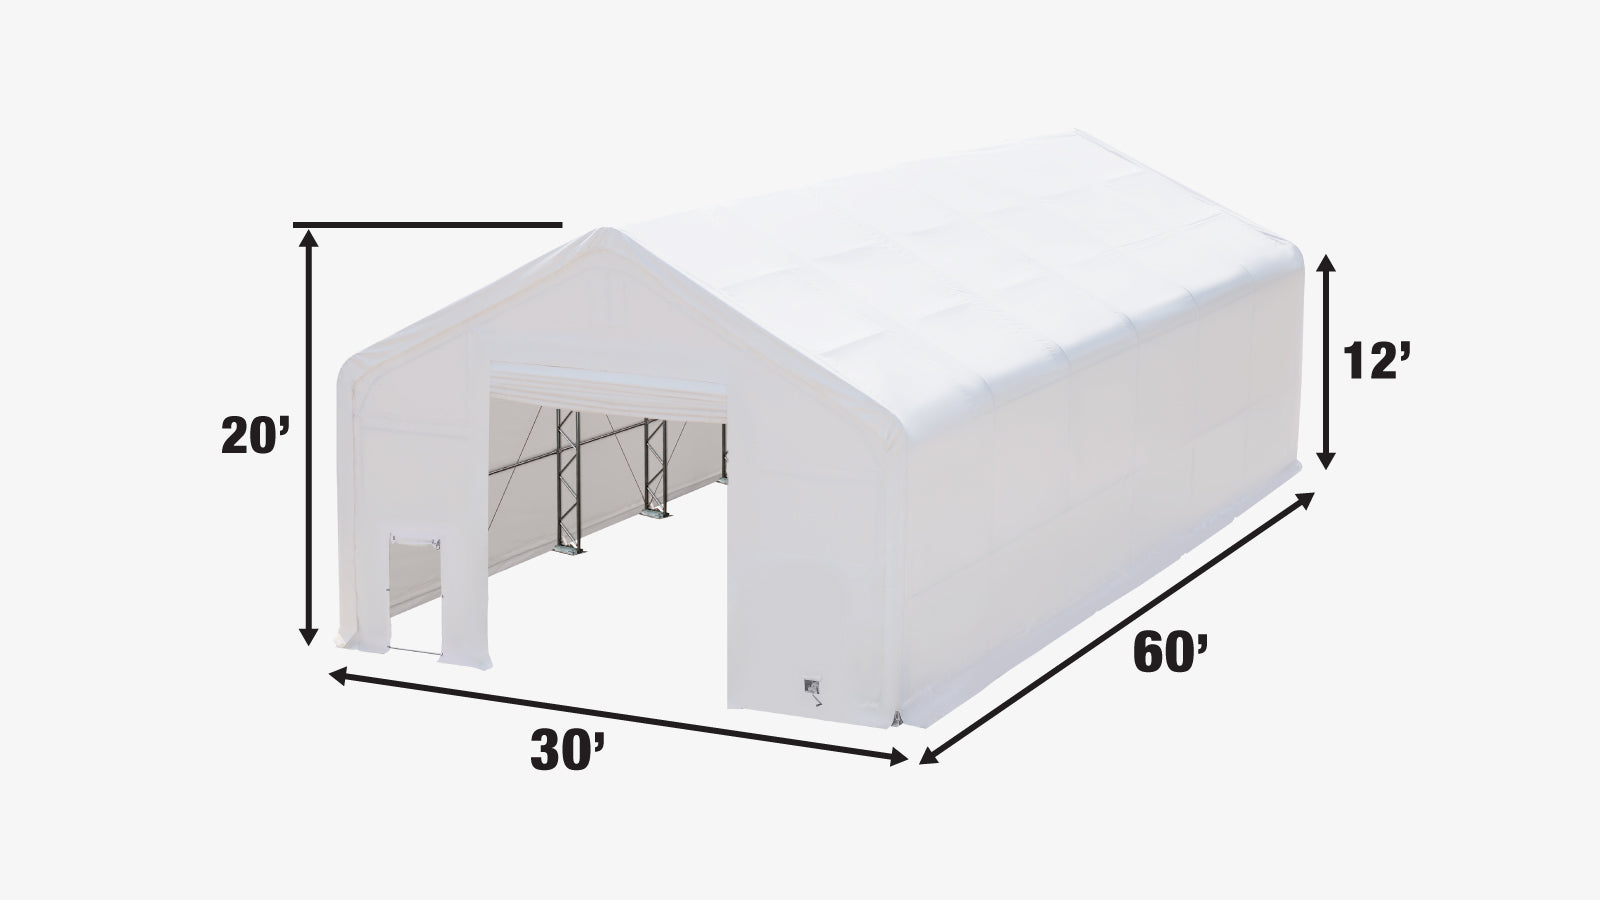 TMG Industrial 30' x 60' Dual Truss Storage Shelter with Heavy Duty 17 oz PVC Cover & Drive Through Doors, TMG-DT3061-specifications-image